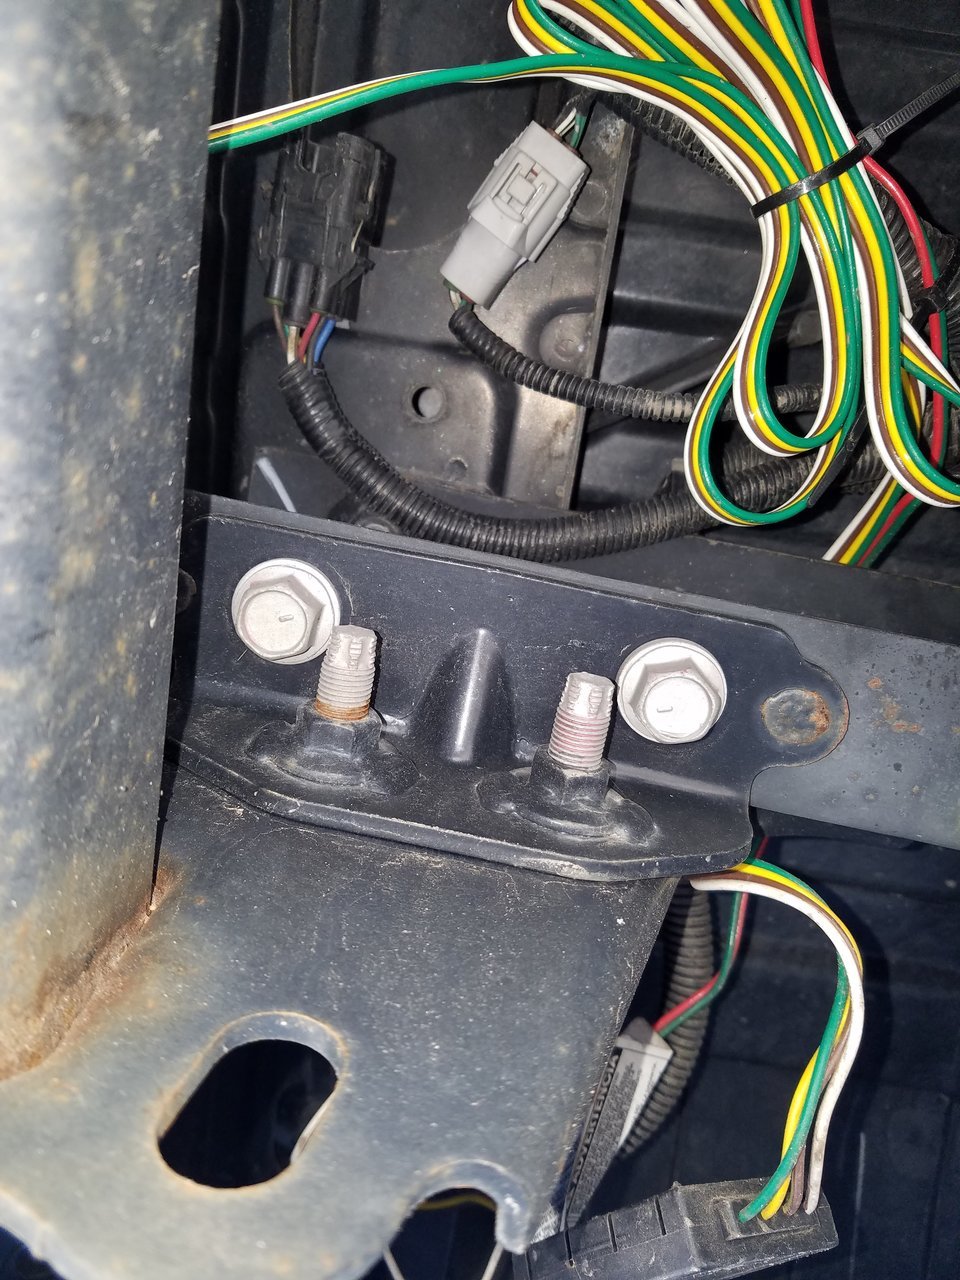 2016 Toyota Tacoma Trailer Wiring Harness from twstatic.net